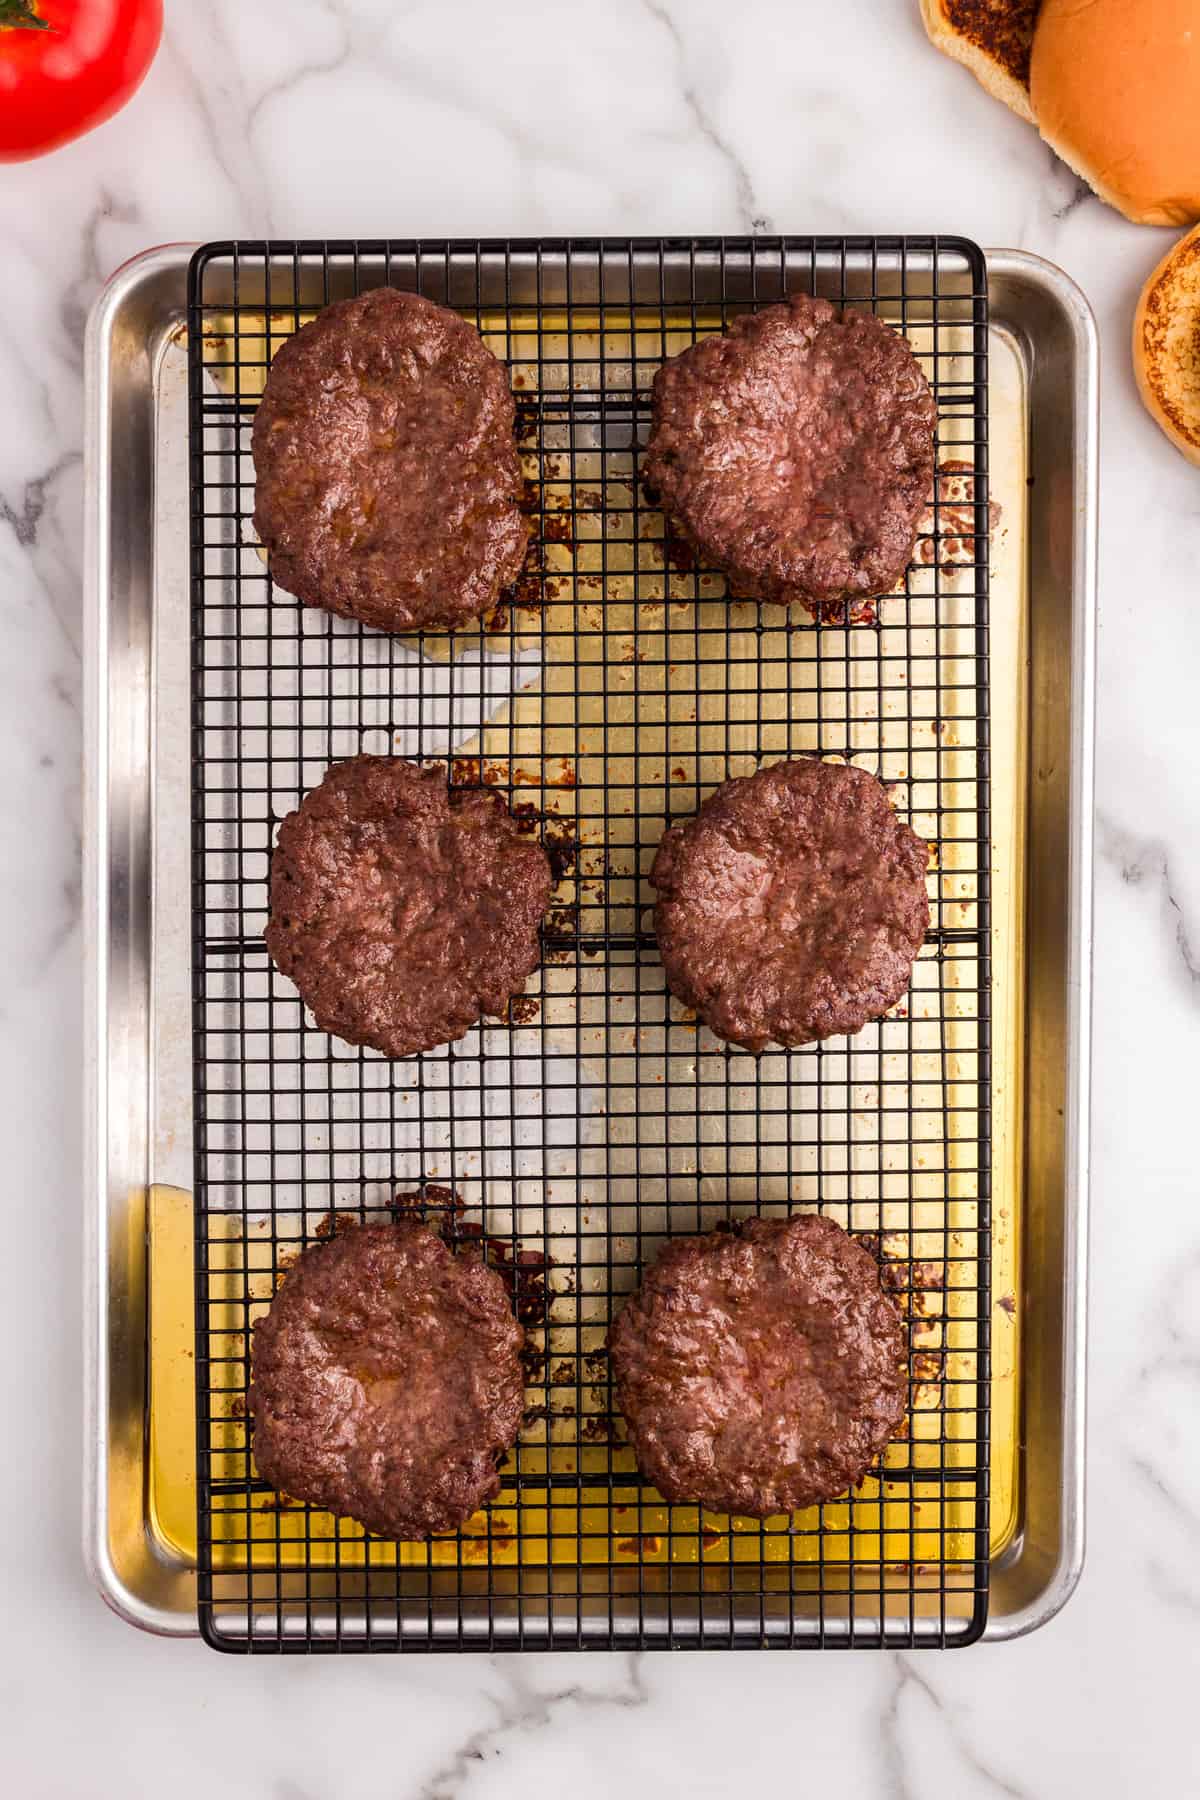 Baked Hamburgers on cooking grate